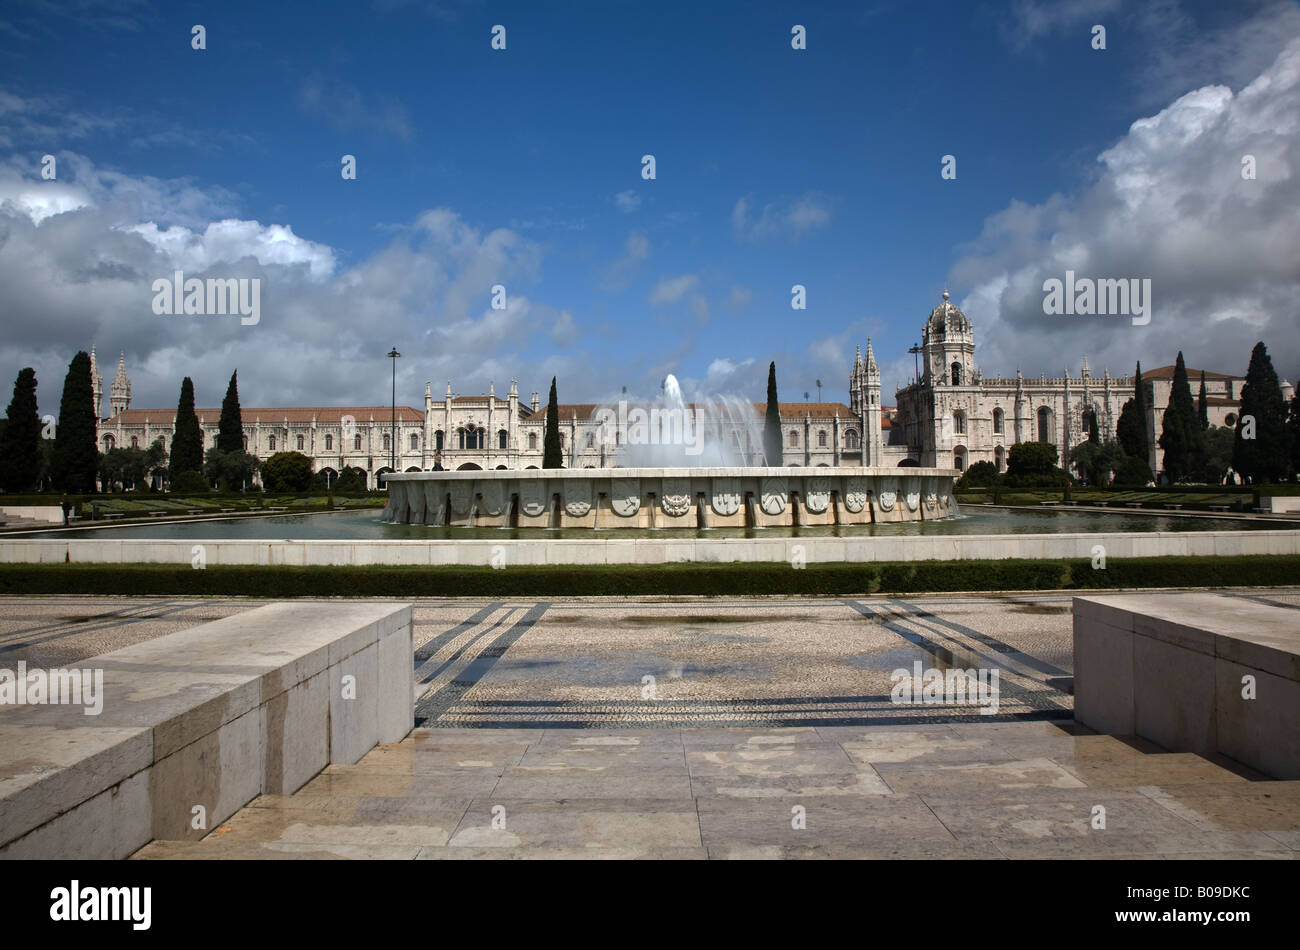 Mosteiro dos Jeronimos (Jeronimos Monastery) located in the Belem District of Lisbon (Lisboa) Portugal. Stock Photo